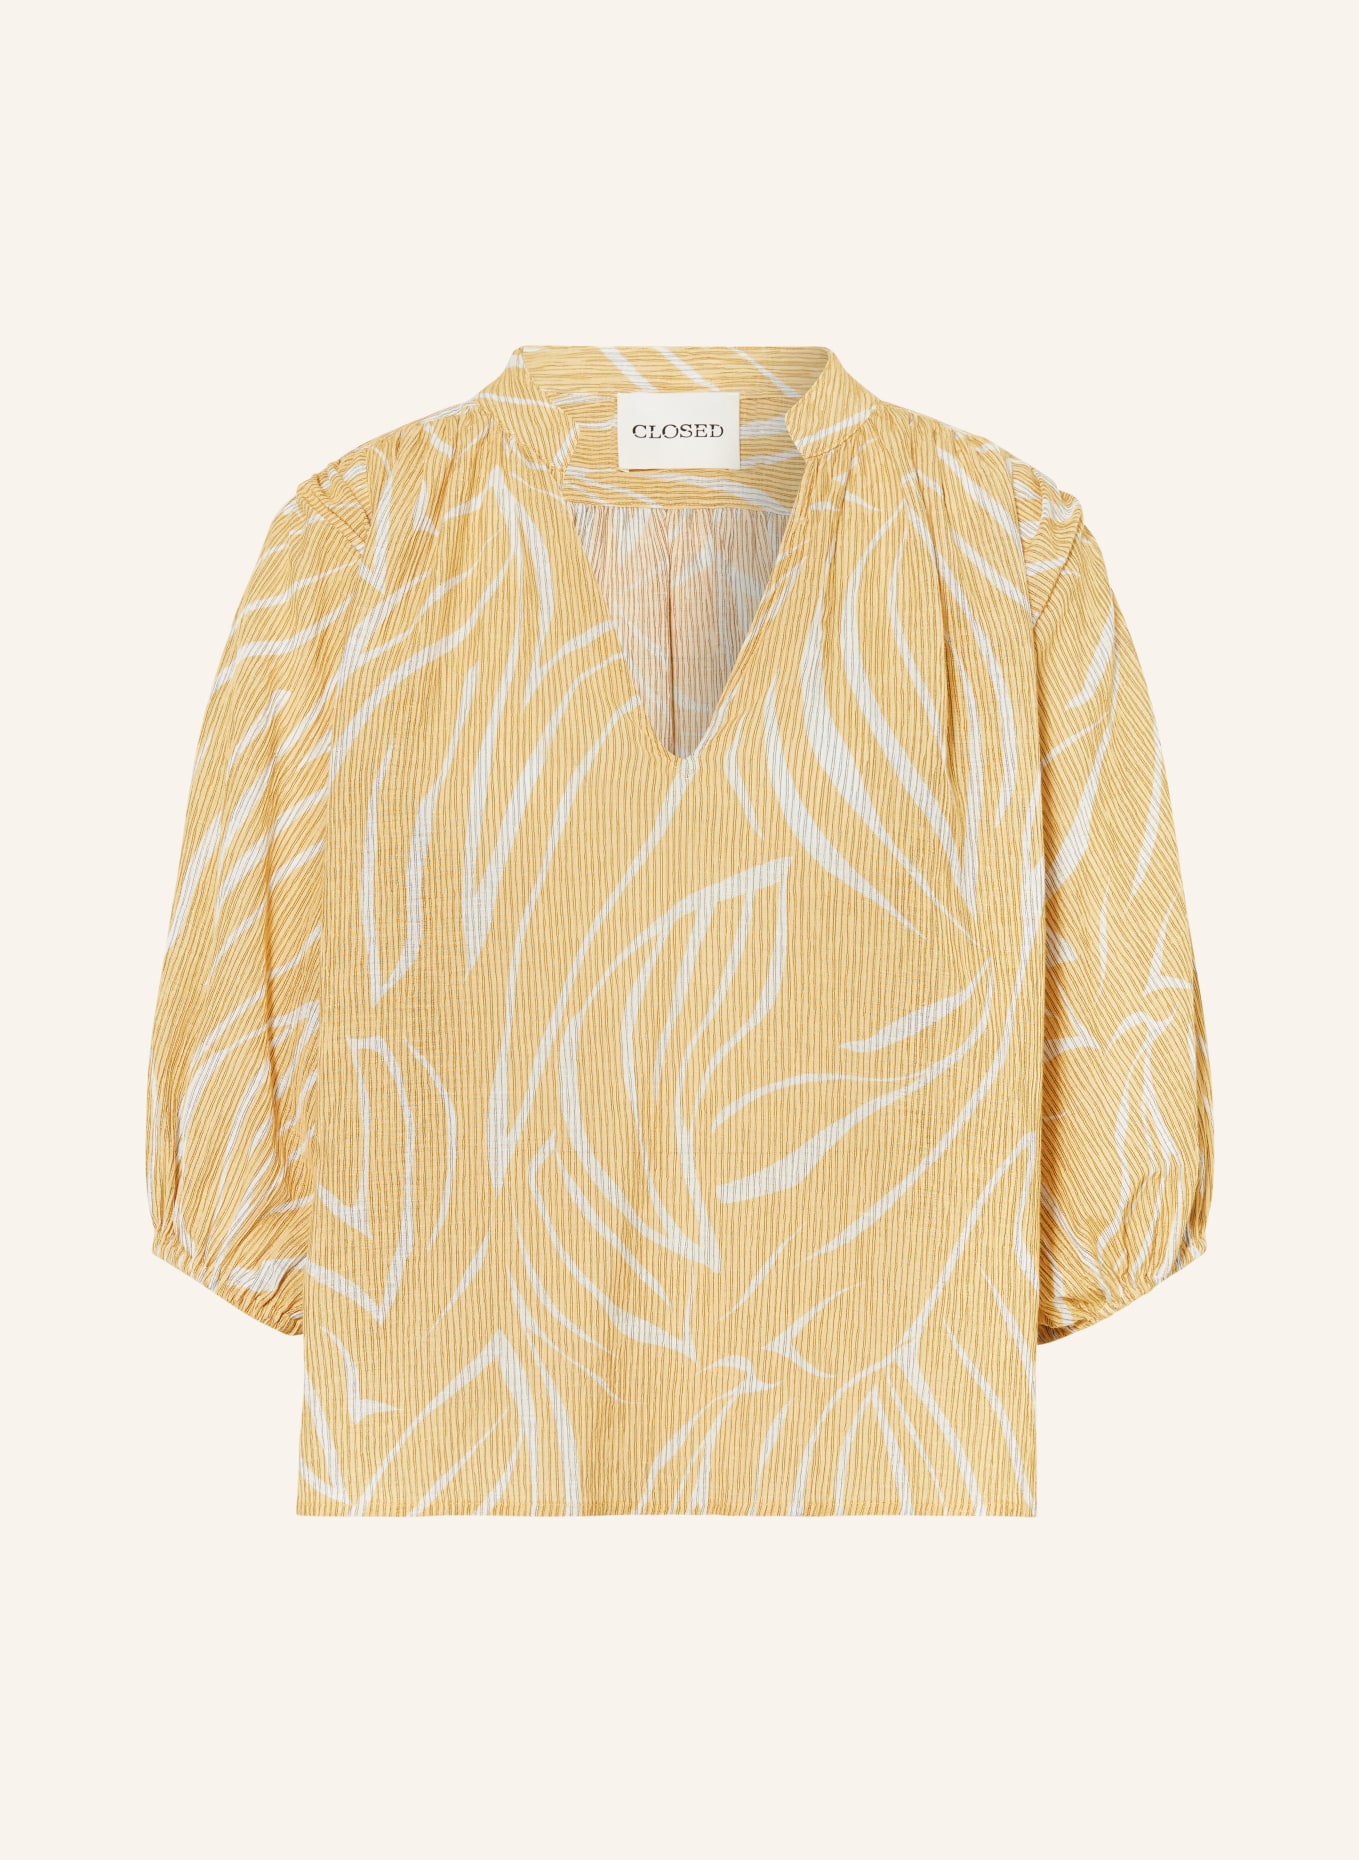 CLOSED Shirt blouse with 3/4 sleeves, Color: WHITE/ DARK YELLOW (Image 1)